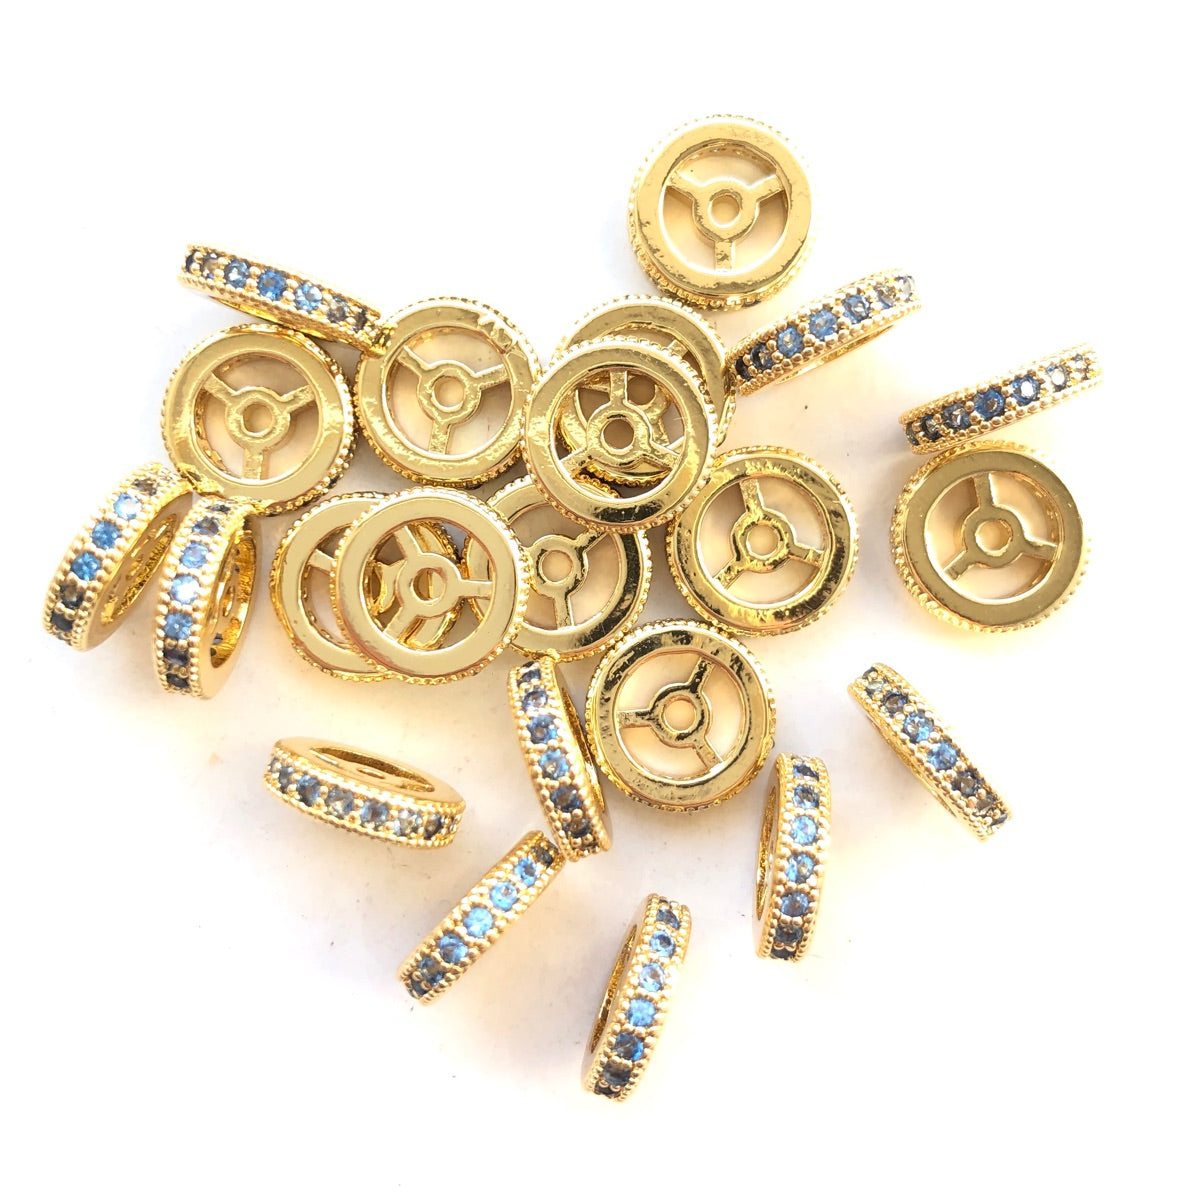 20pcs/lot 9.6/12mm Lake Blue CZ Paved Wheel Rondelle Spacers Gold CZ Paved Spacers New Spacers Arrivals Rondelle Beads Charms Beads Beyond